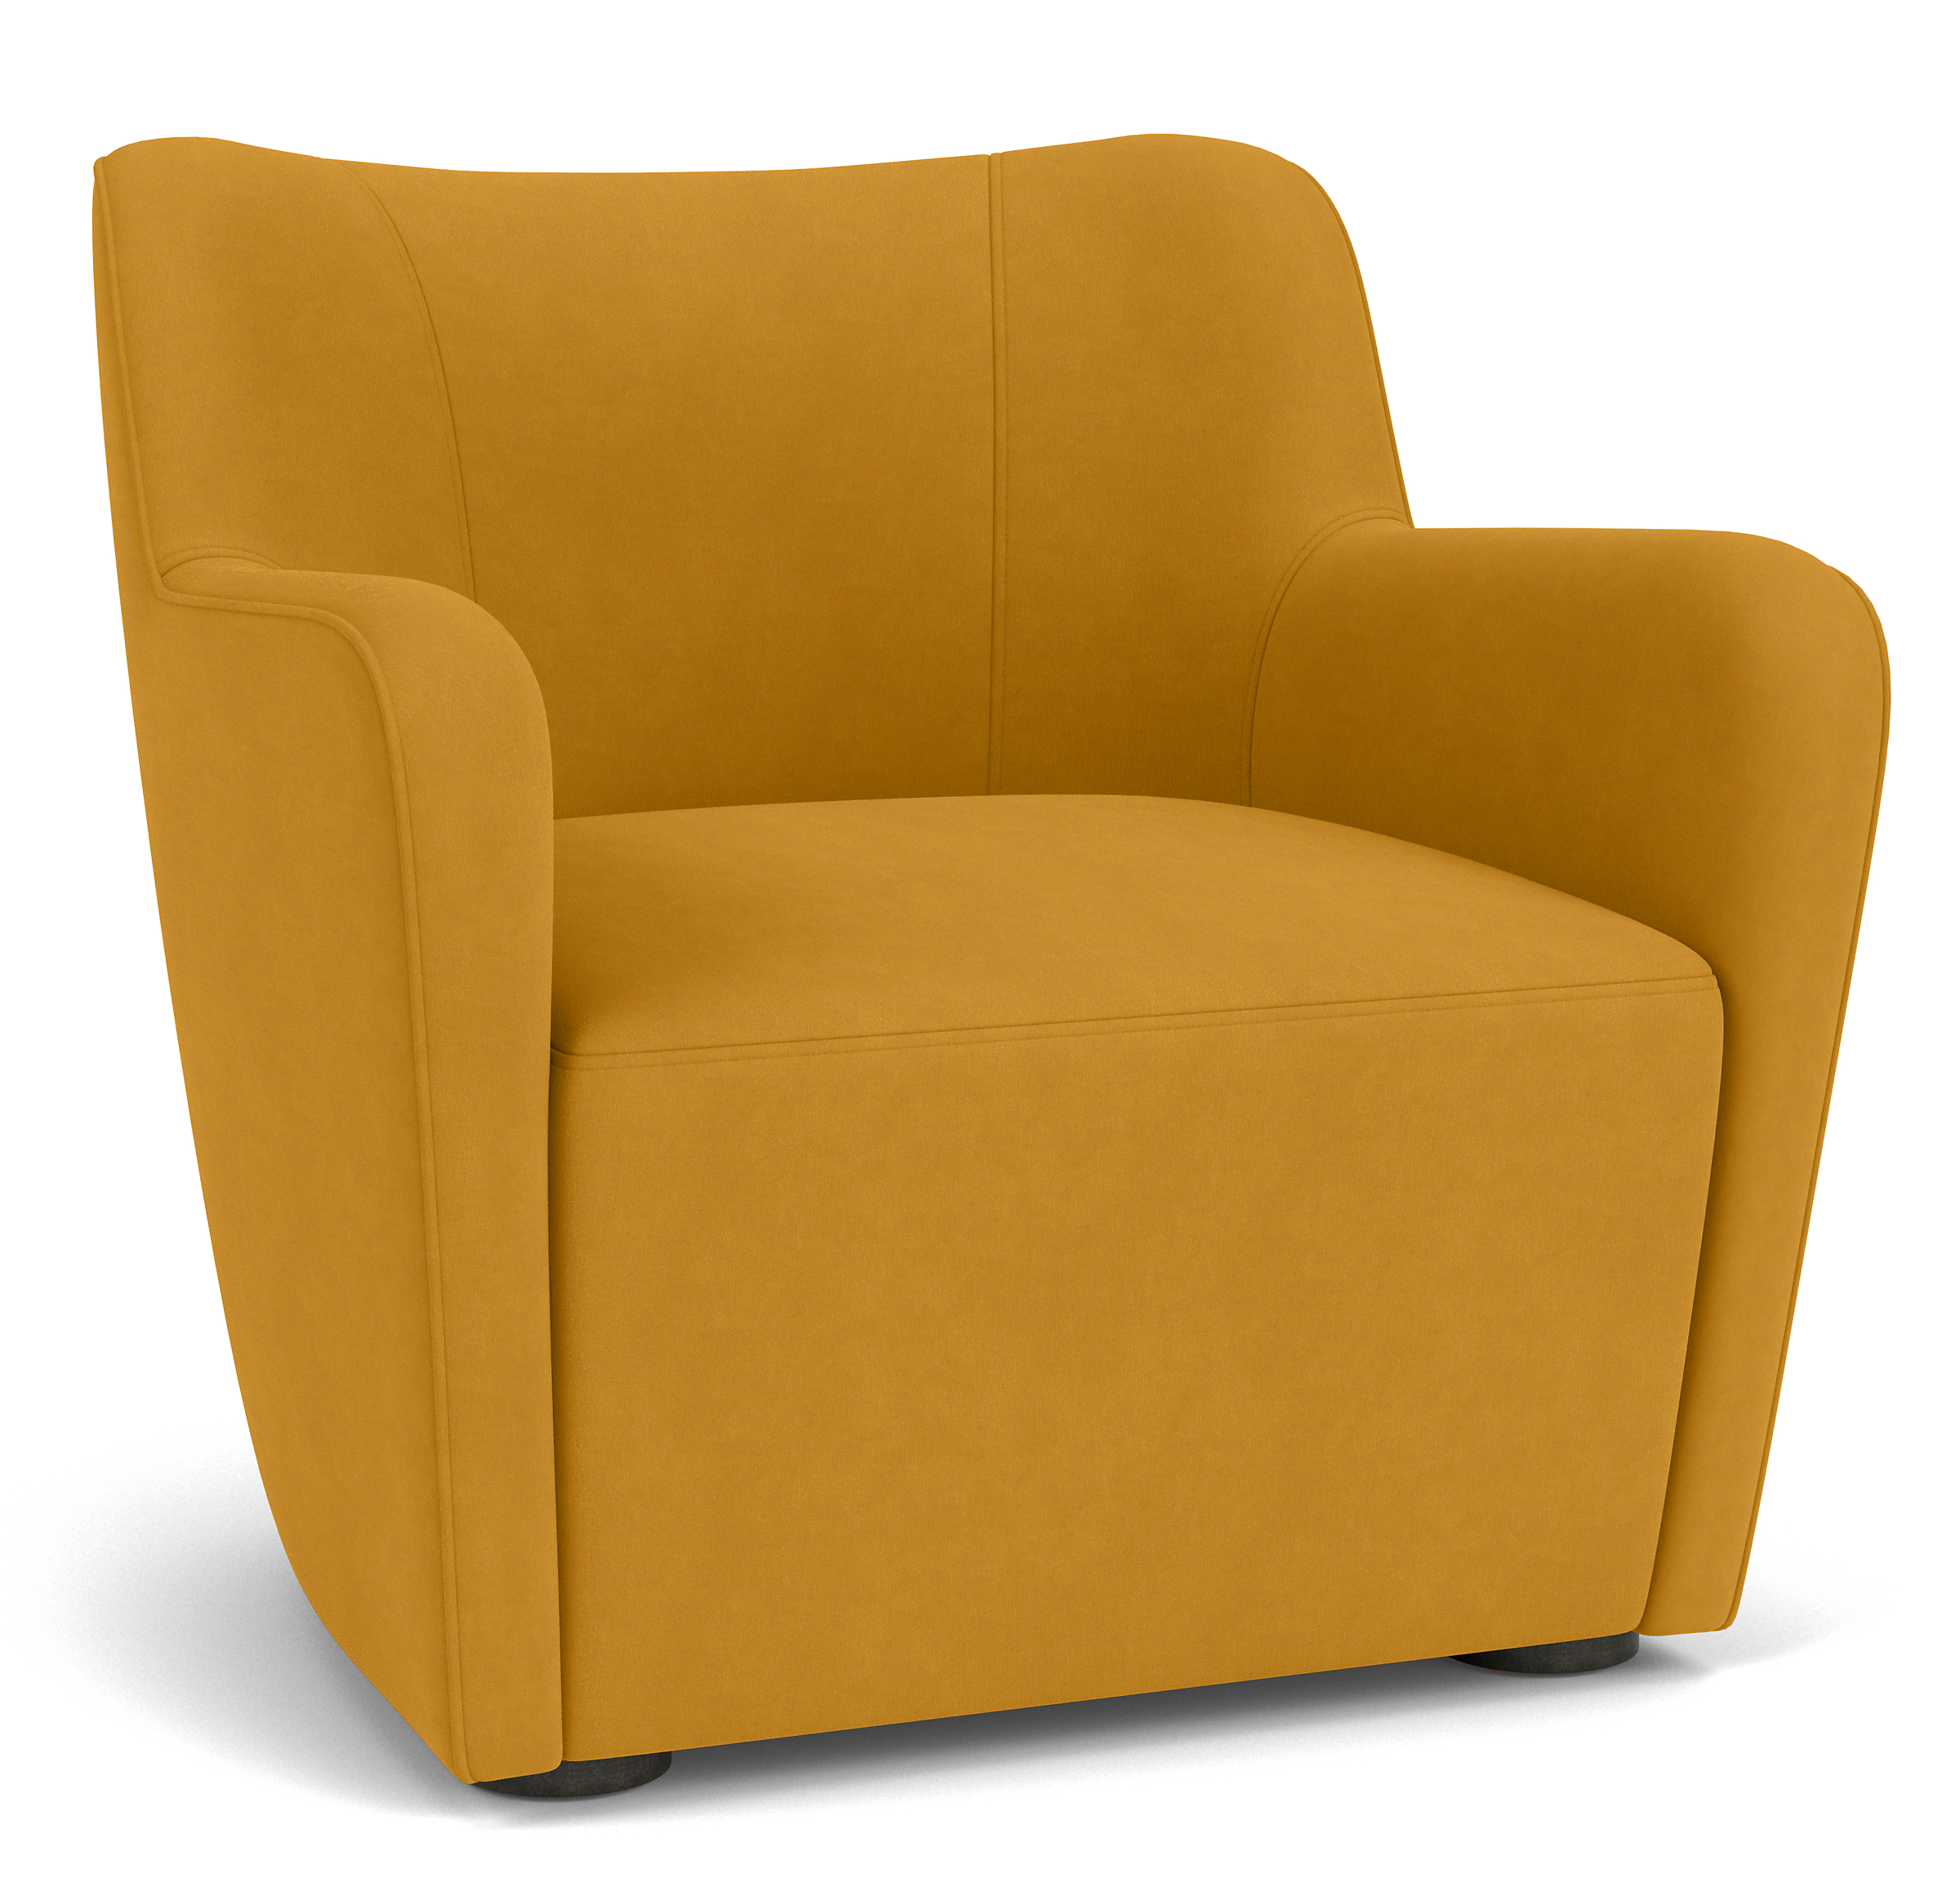 Lily Chair in Vance Gold